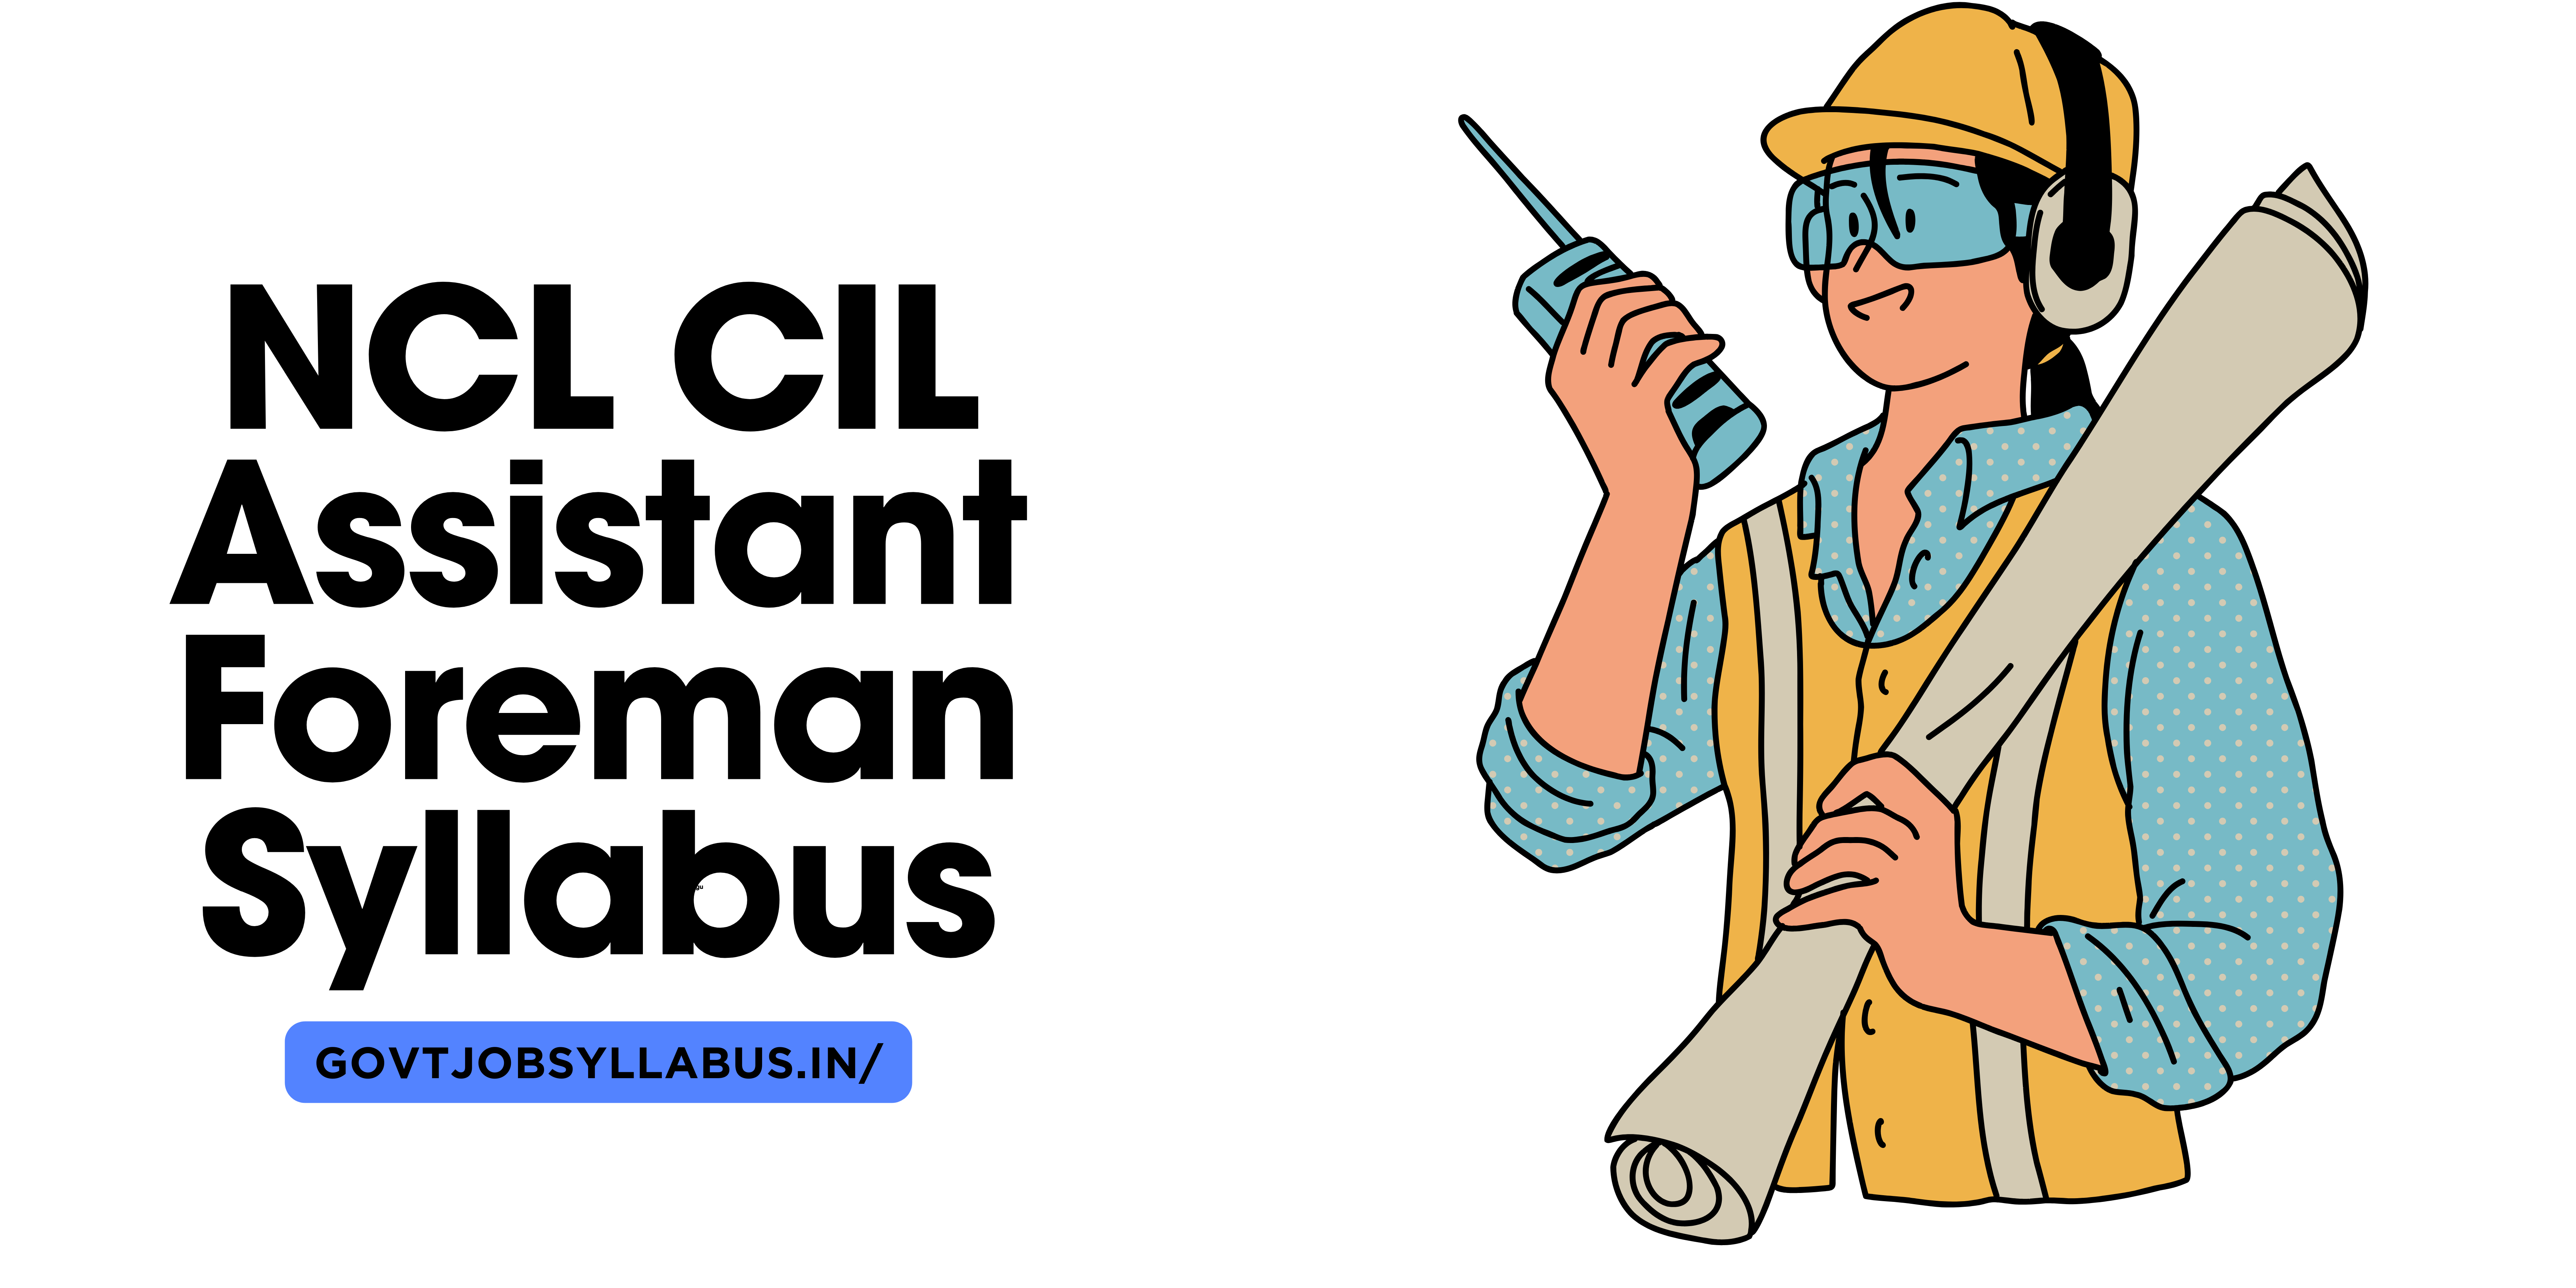 NCL CIL Assistant Foreman syllabus